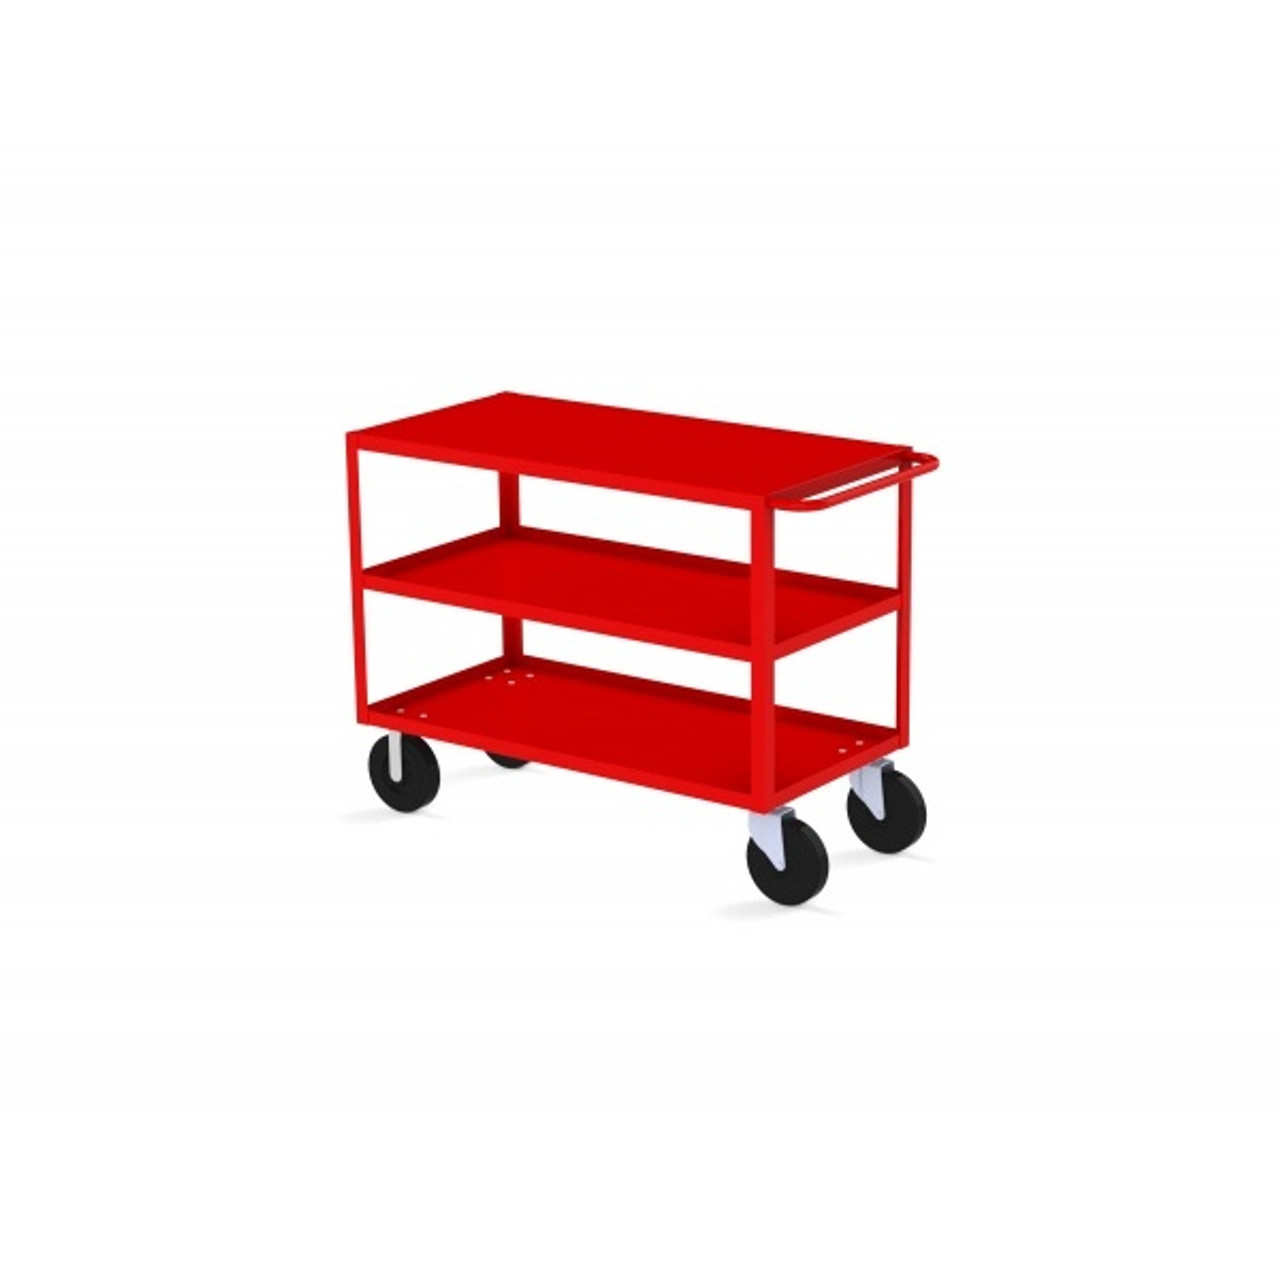 Valley Craft Three Shelf 30 x 48" Flush-Top Utility Cart, Red with Mold On Casters (CALL FOR BEST PRICING)